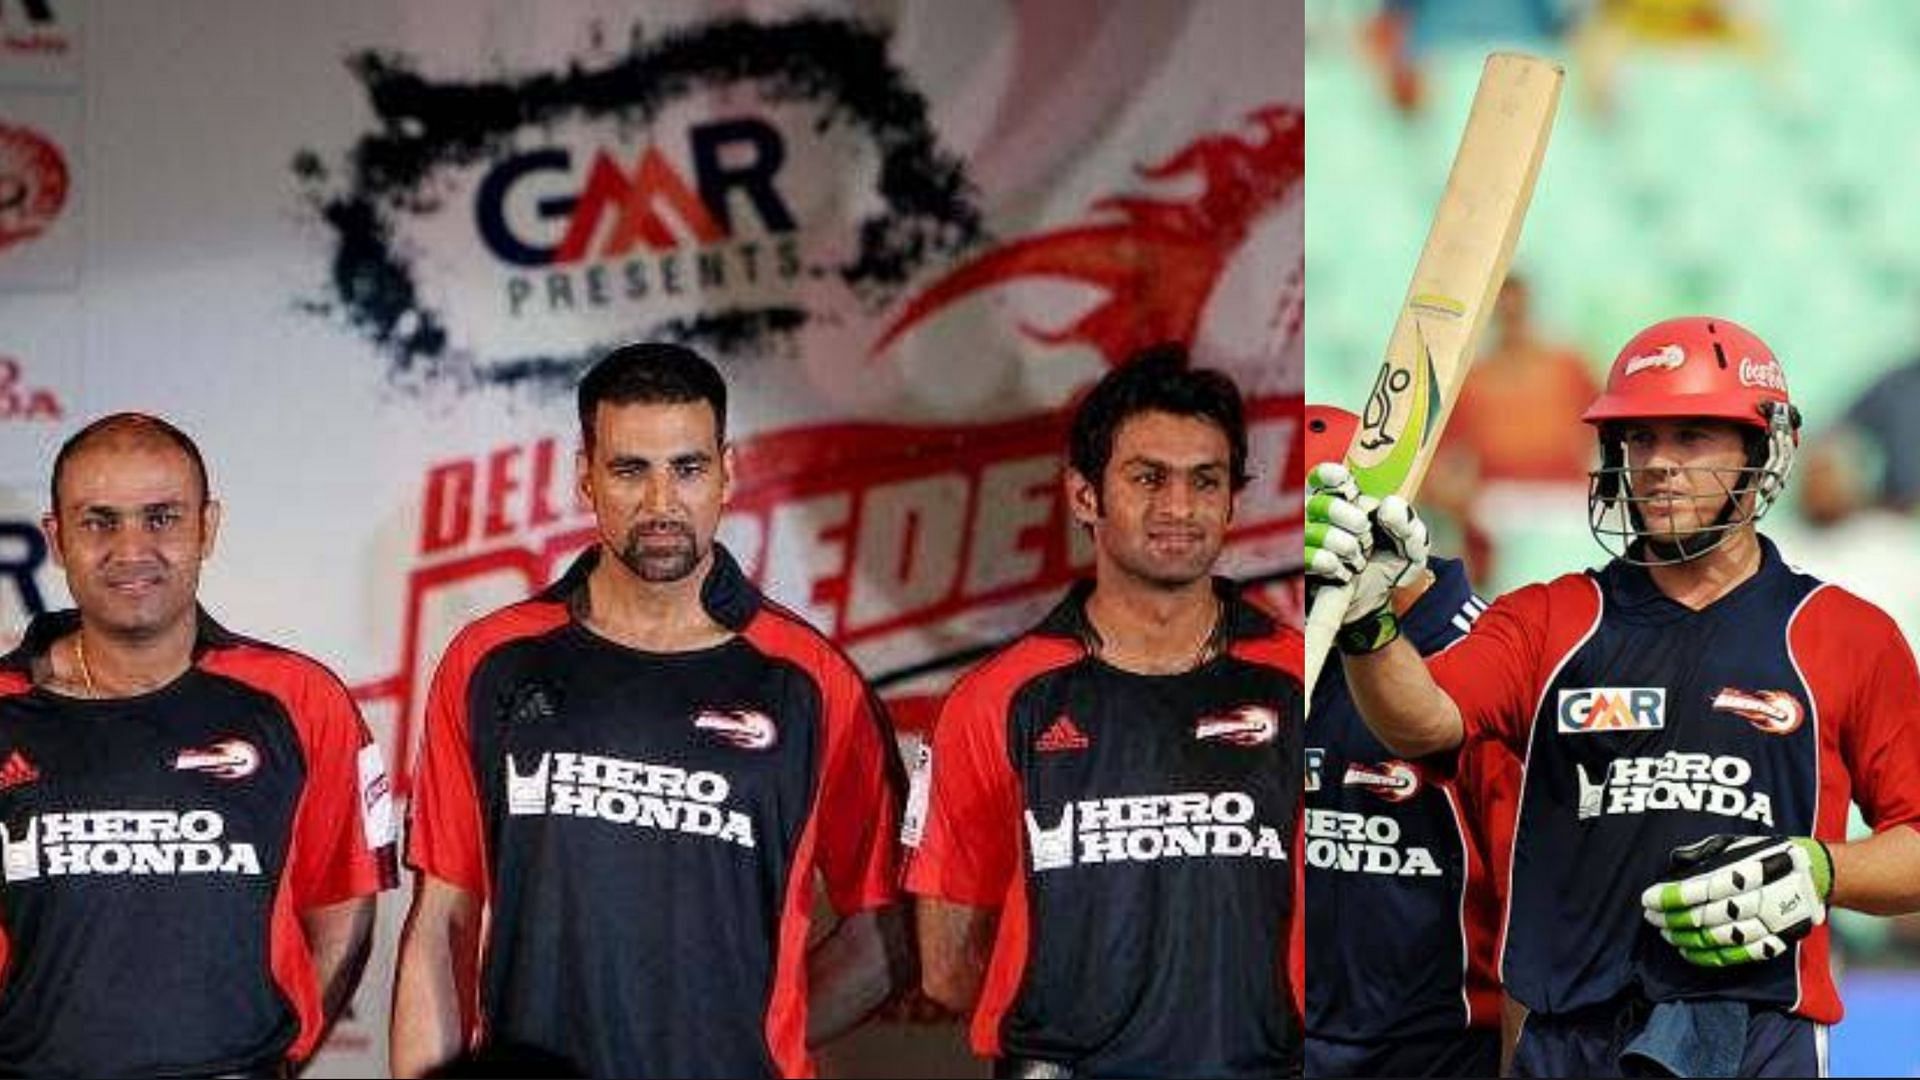 AB de Villiers made his IPL debut for the Delhi Daredevils back in 2008